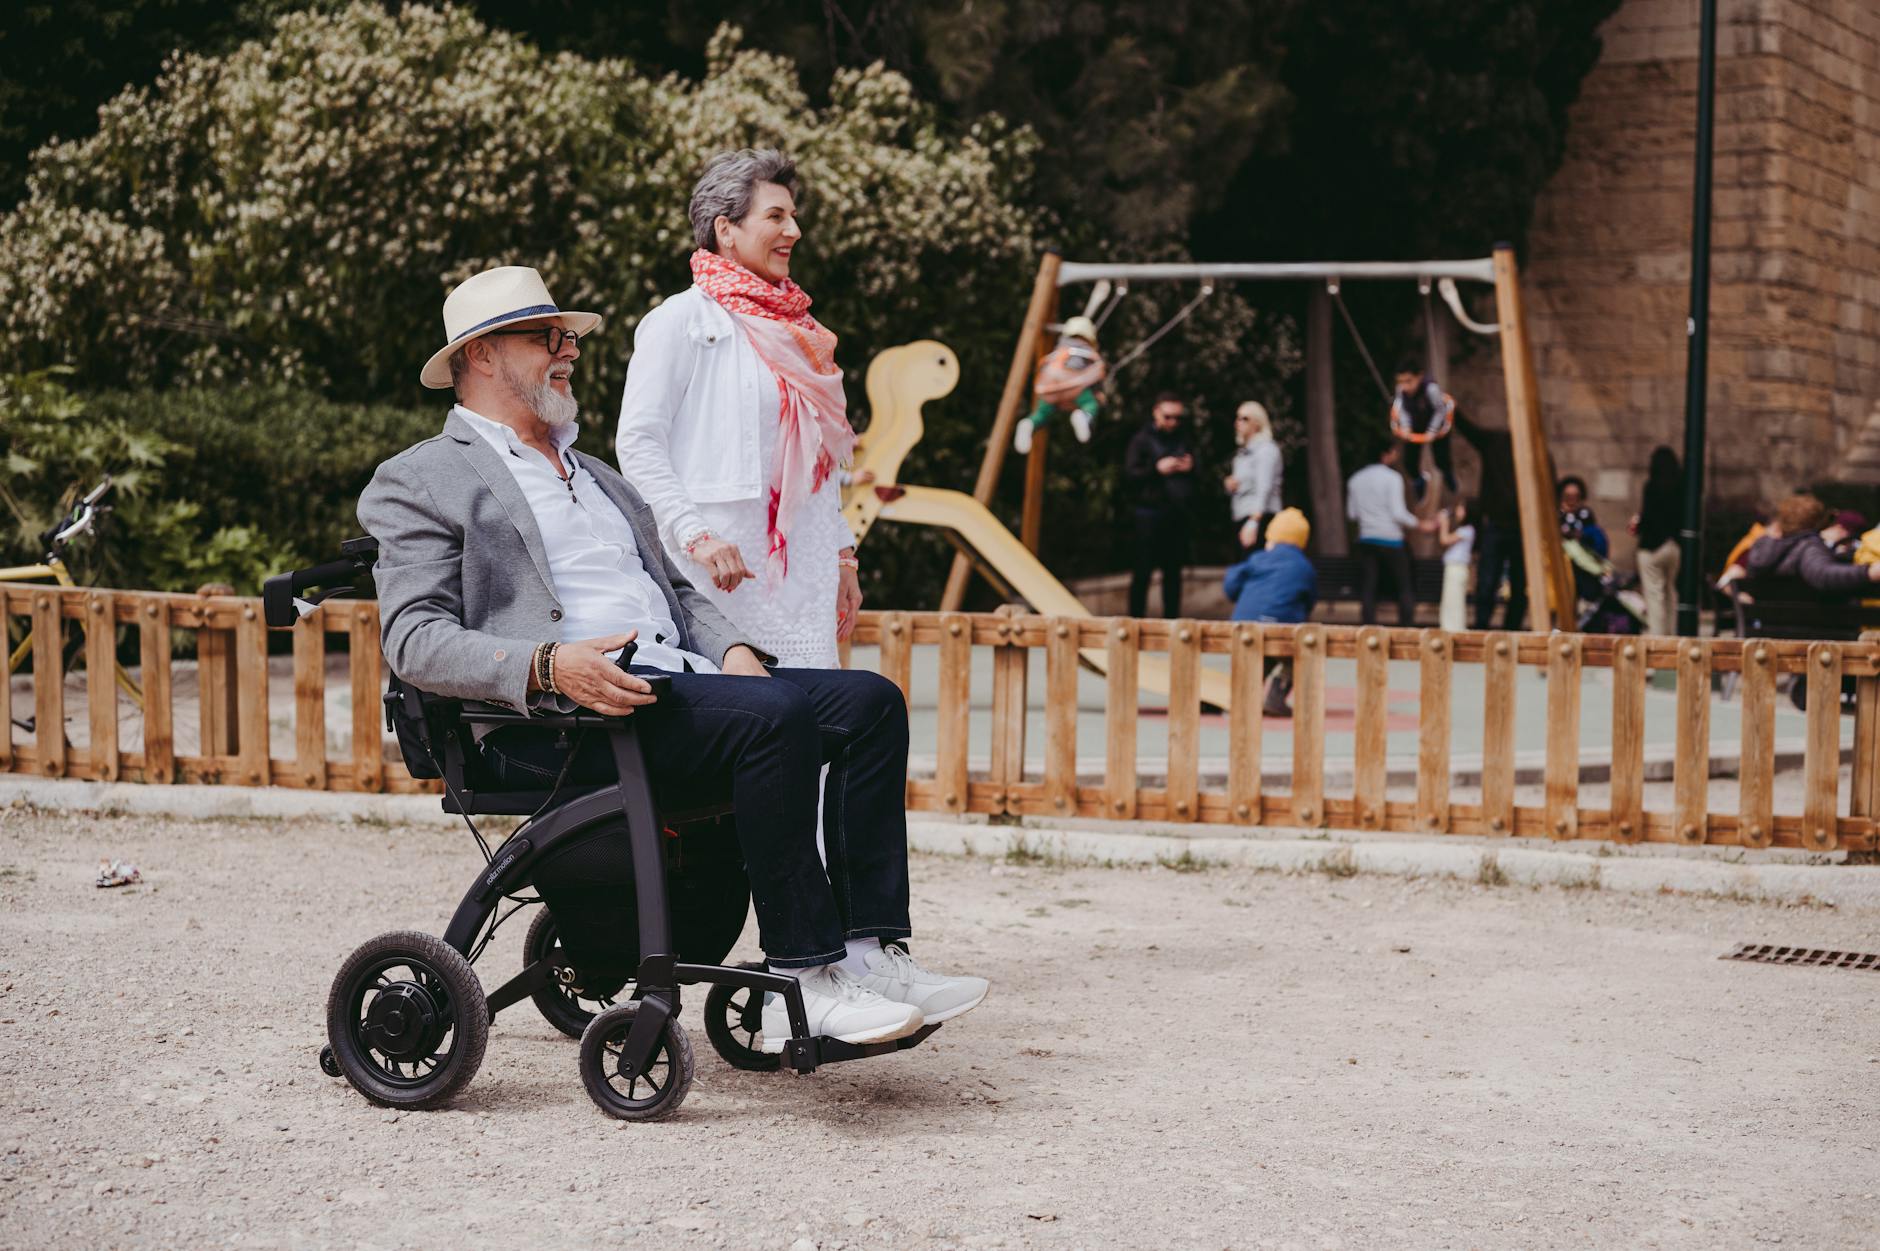 man using a mobility aid passing by a playground